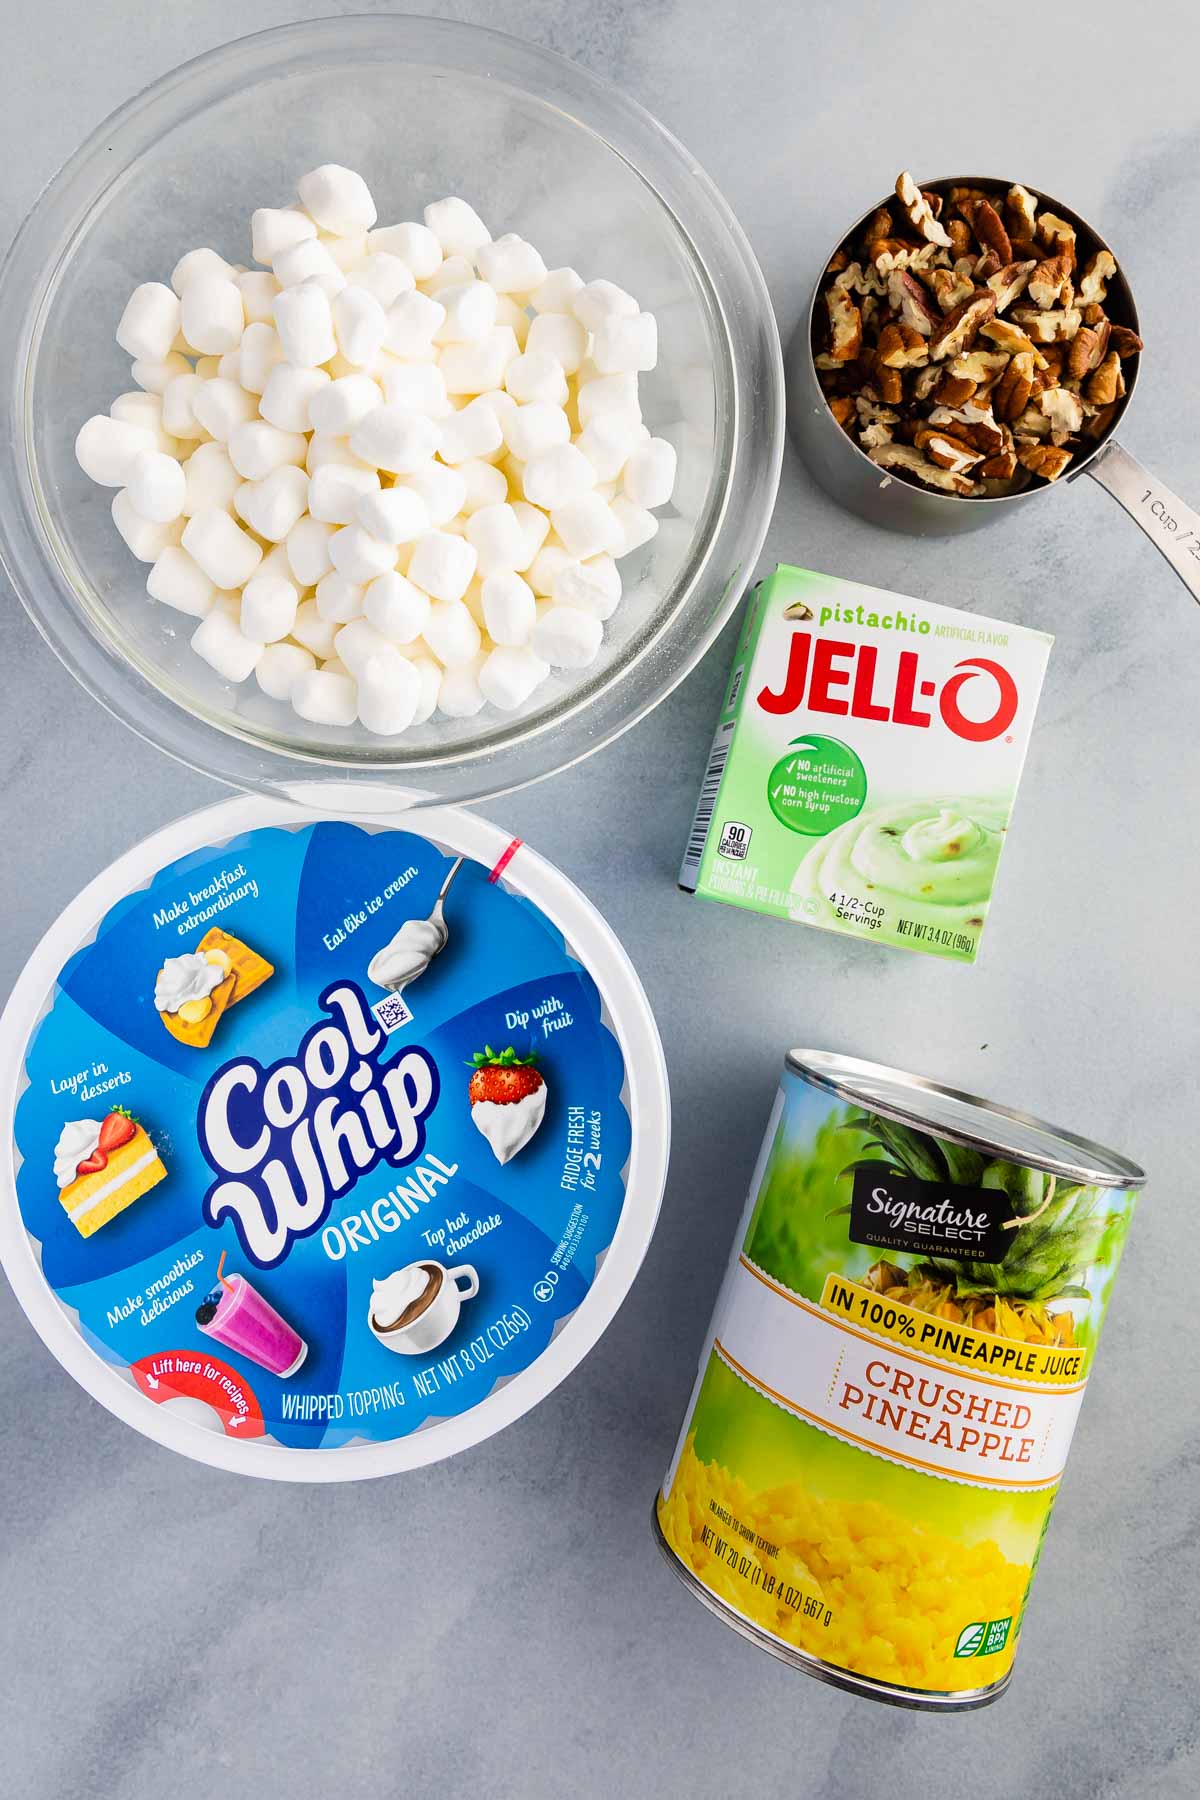 ingredients in Watergate salad photo: marshmallows, nuts, cool whip, pudding box, pineapple can